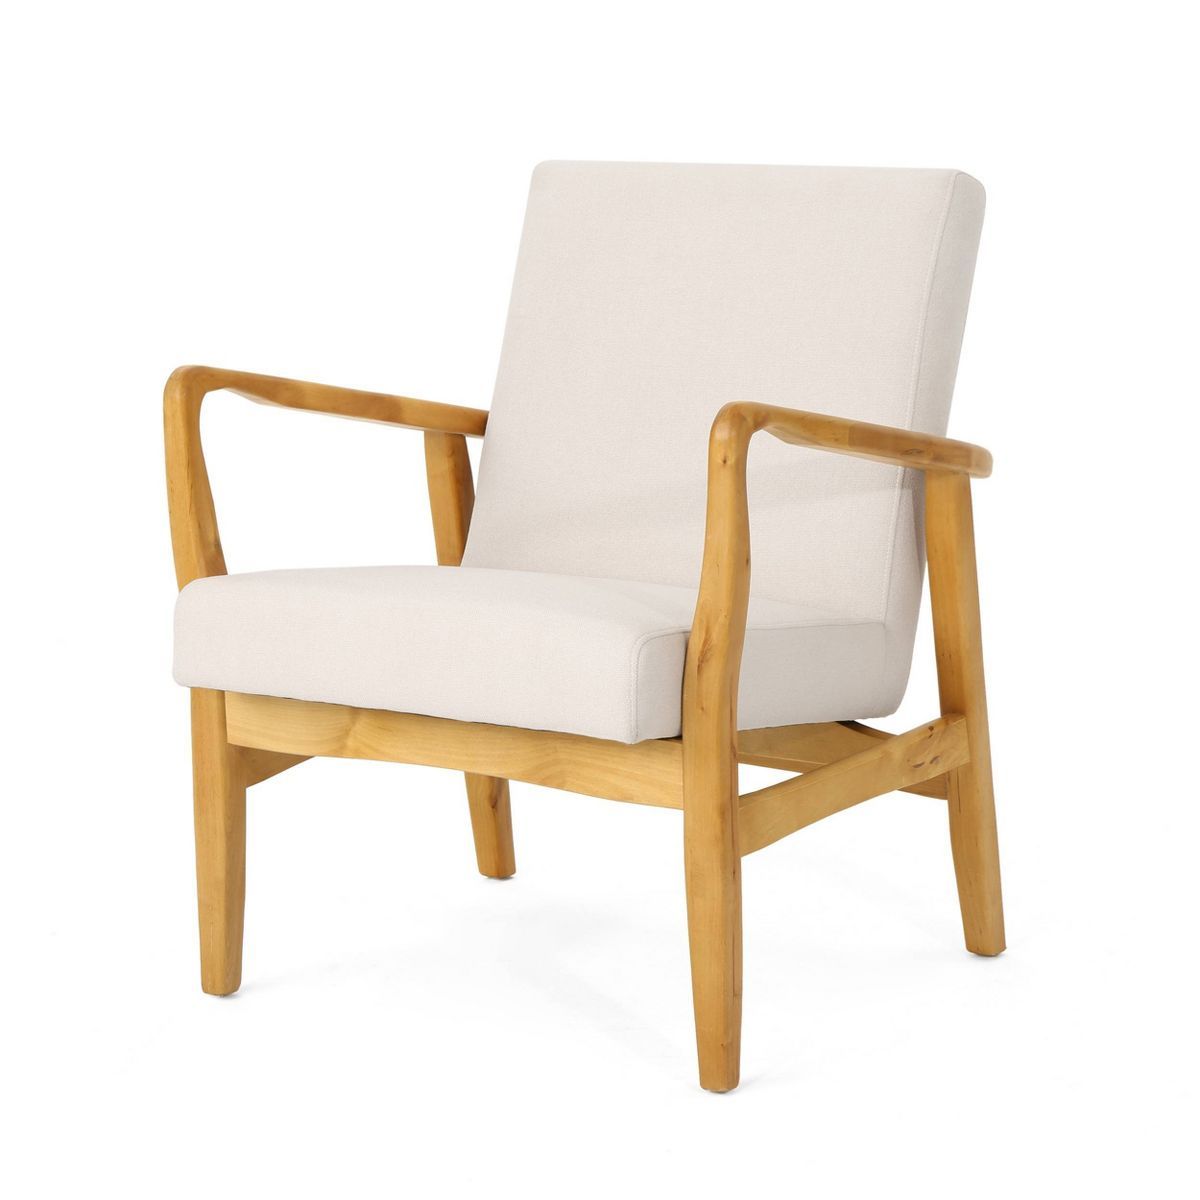 Perseus Mid Century Modern Club Chair - Christopher Knight Home | Target